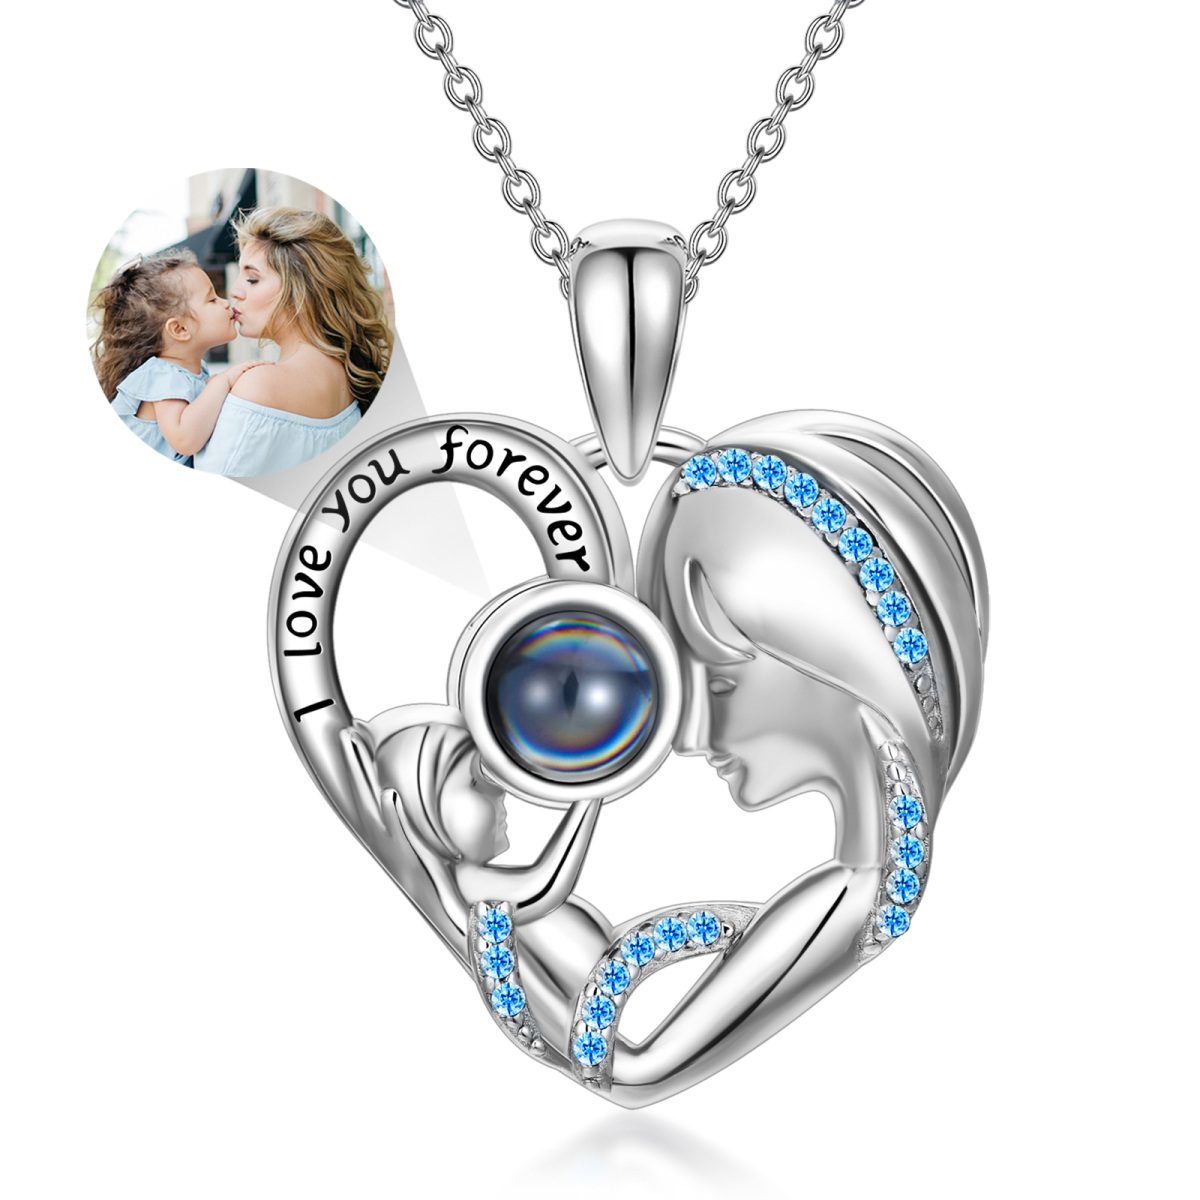 Sterling Silver Circular Shaped Projection Stone Heart Personalized Pendant Necklace with Engraved Word-1